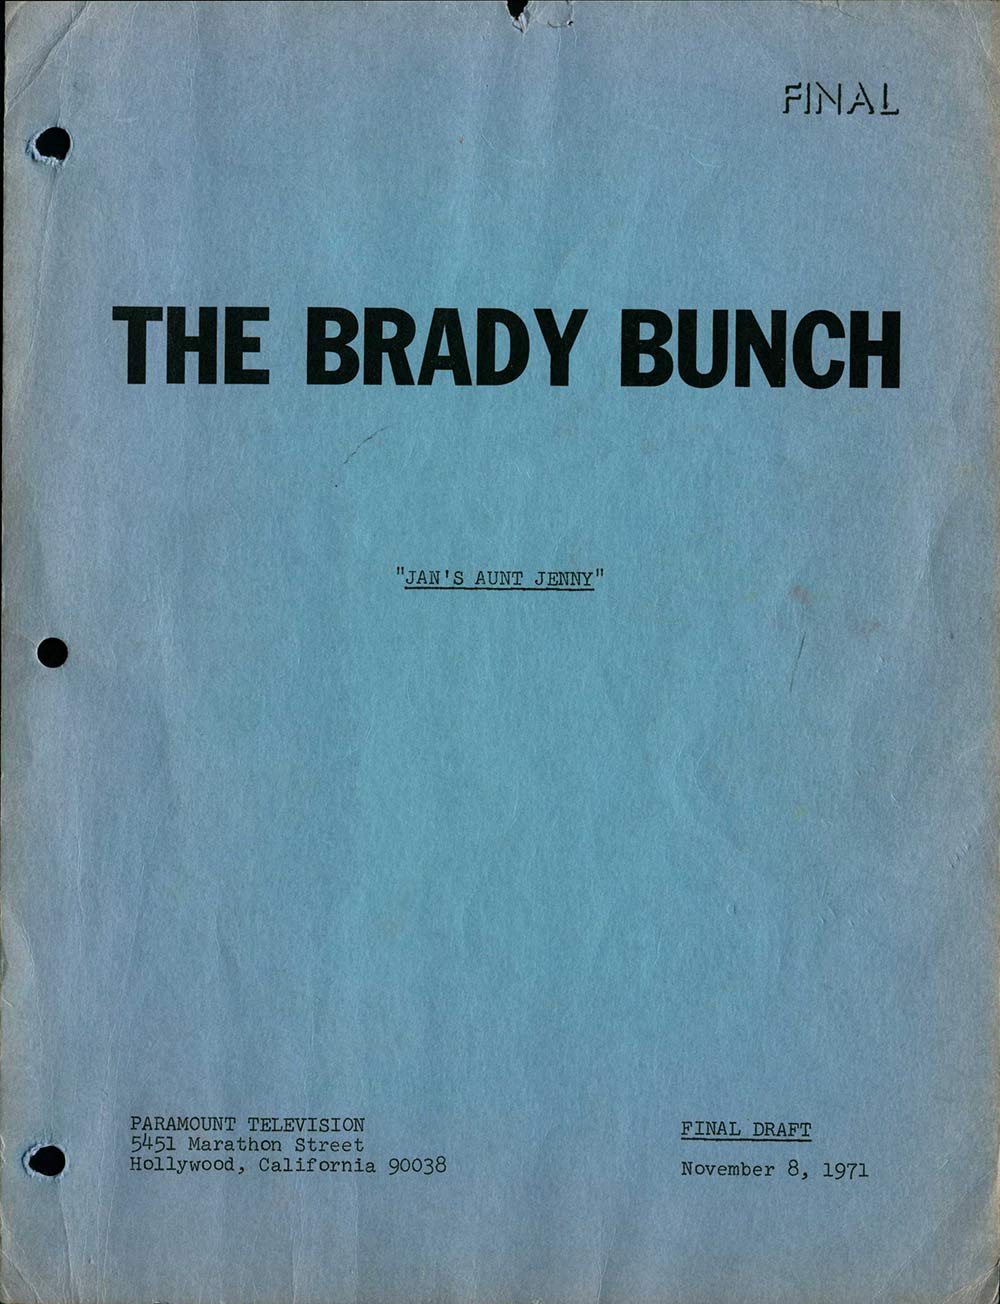 Cover of The Brady Bunch: Jan's Aunt Jenny Script from Paramount Television, Final Draft, November 8, 1971